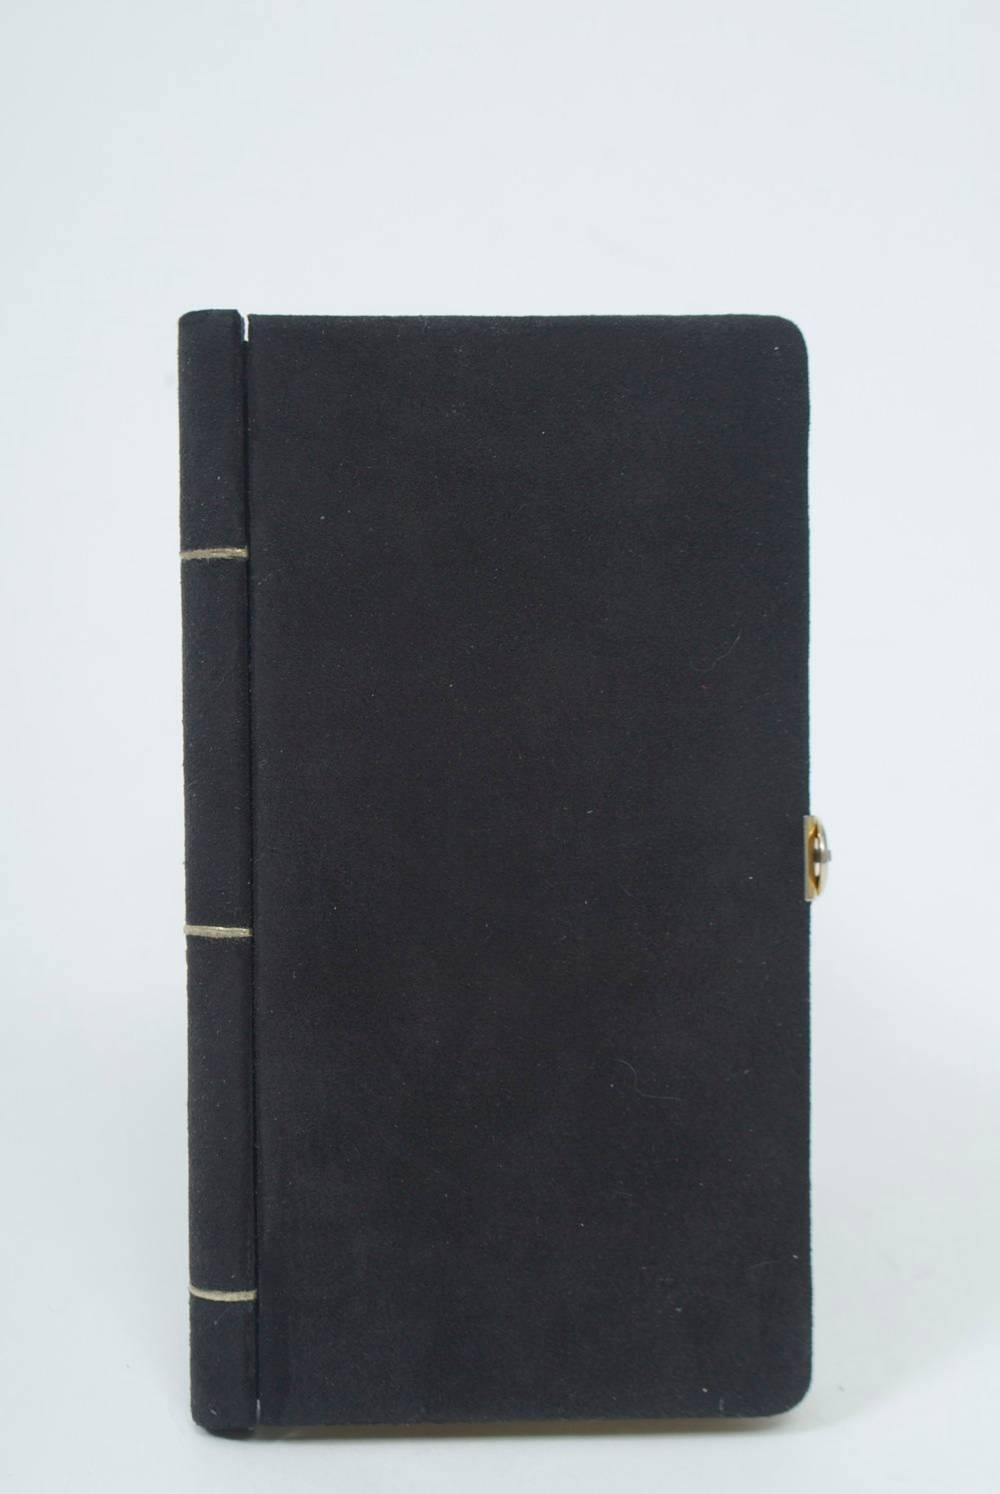 Unique black suede clutch in the surrealist mode, resembling a slim book and accented with three gold leather stripes on the binding and gold metal for the page edges, with a simple gold metal loop clasp. Fitted interior with multiple compartments